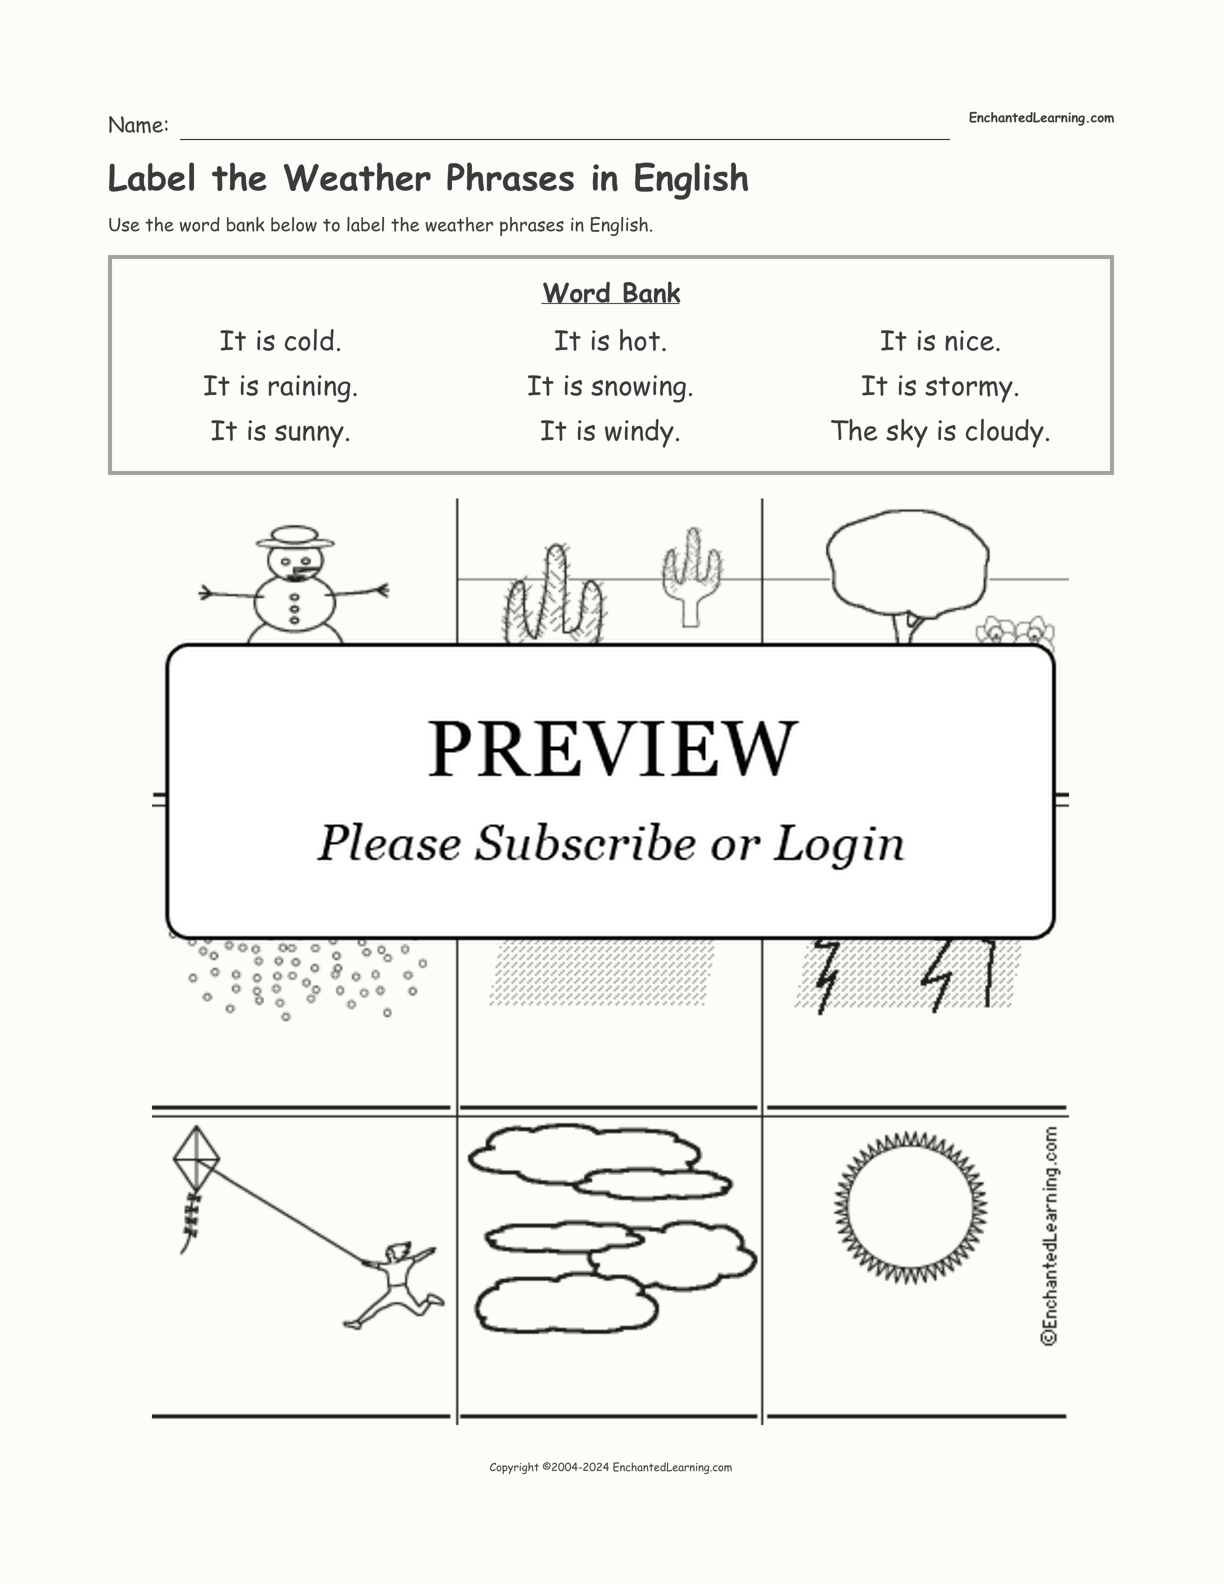 Label the Weather Phrases in English interactive worksheet page 1